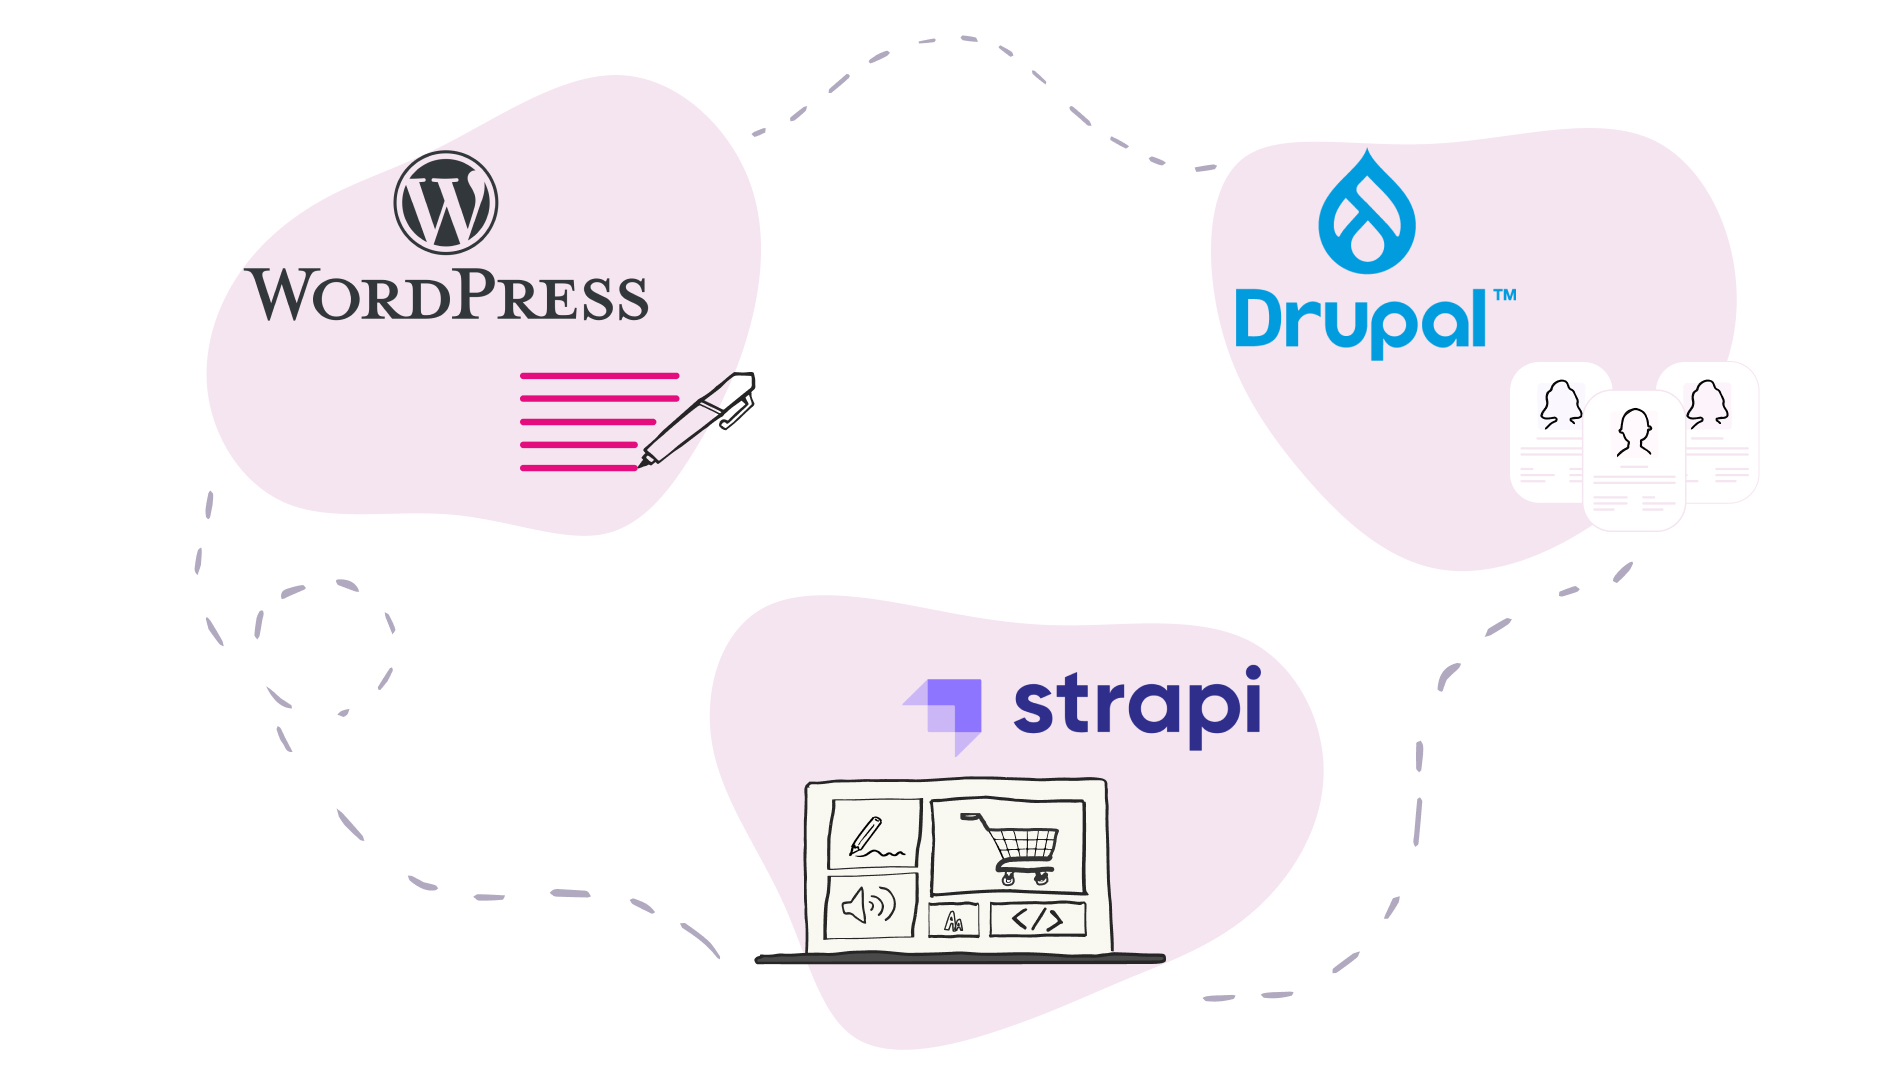 An infographic comparing different CMS options. Three blobs represent WordPress with a pen icon, Drupal with user icons, and Strapi with a shopping cart on a laptop screen. Arrows gently connect the three, suggesting a relationship or flow between the CMS choices.